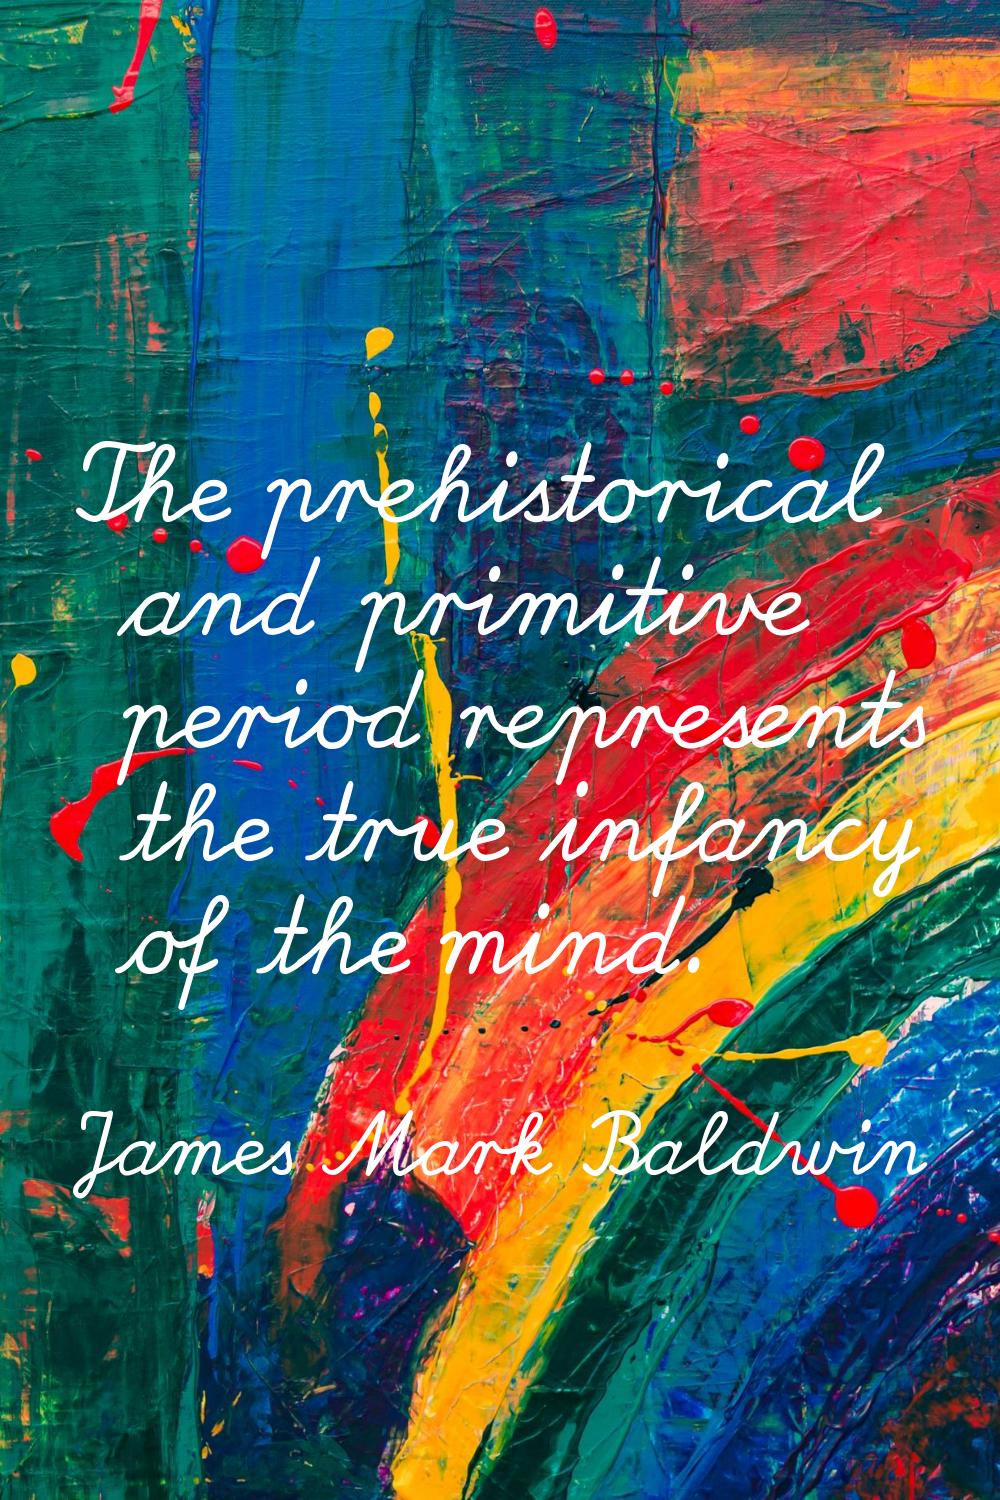 The prehistorical and primitive period represents the true infancy of the mind.